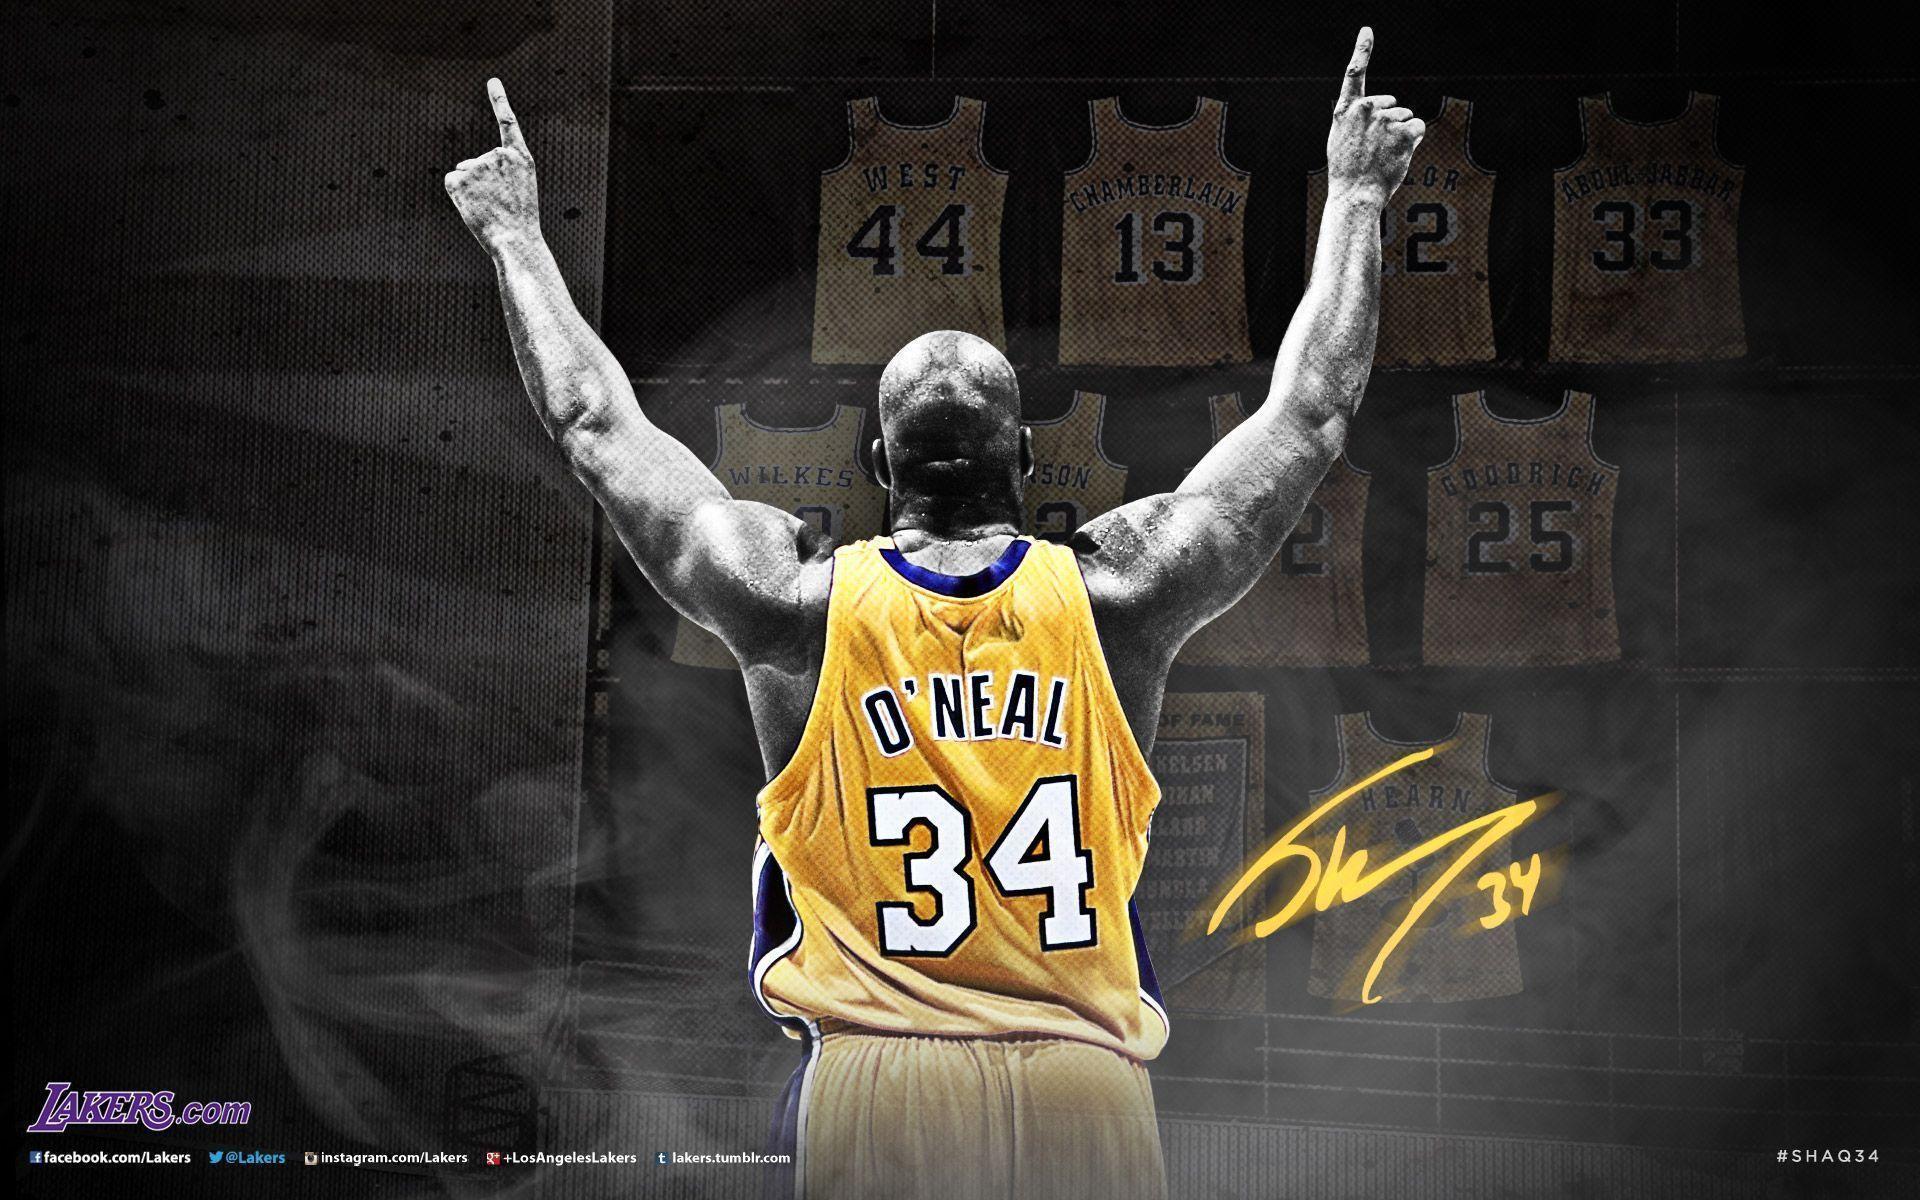 Shaquille O'Neal Los Angeles Lakers Unsigned Hardwood Classics Two-Handed Slam Photograph